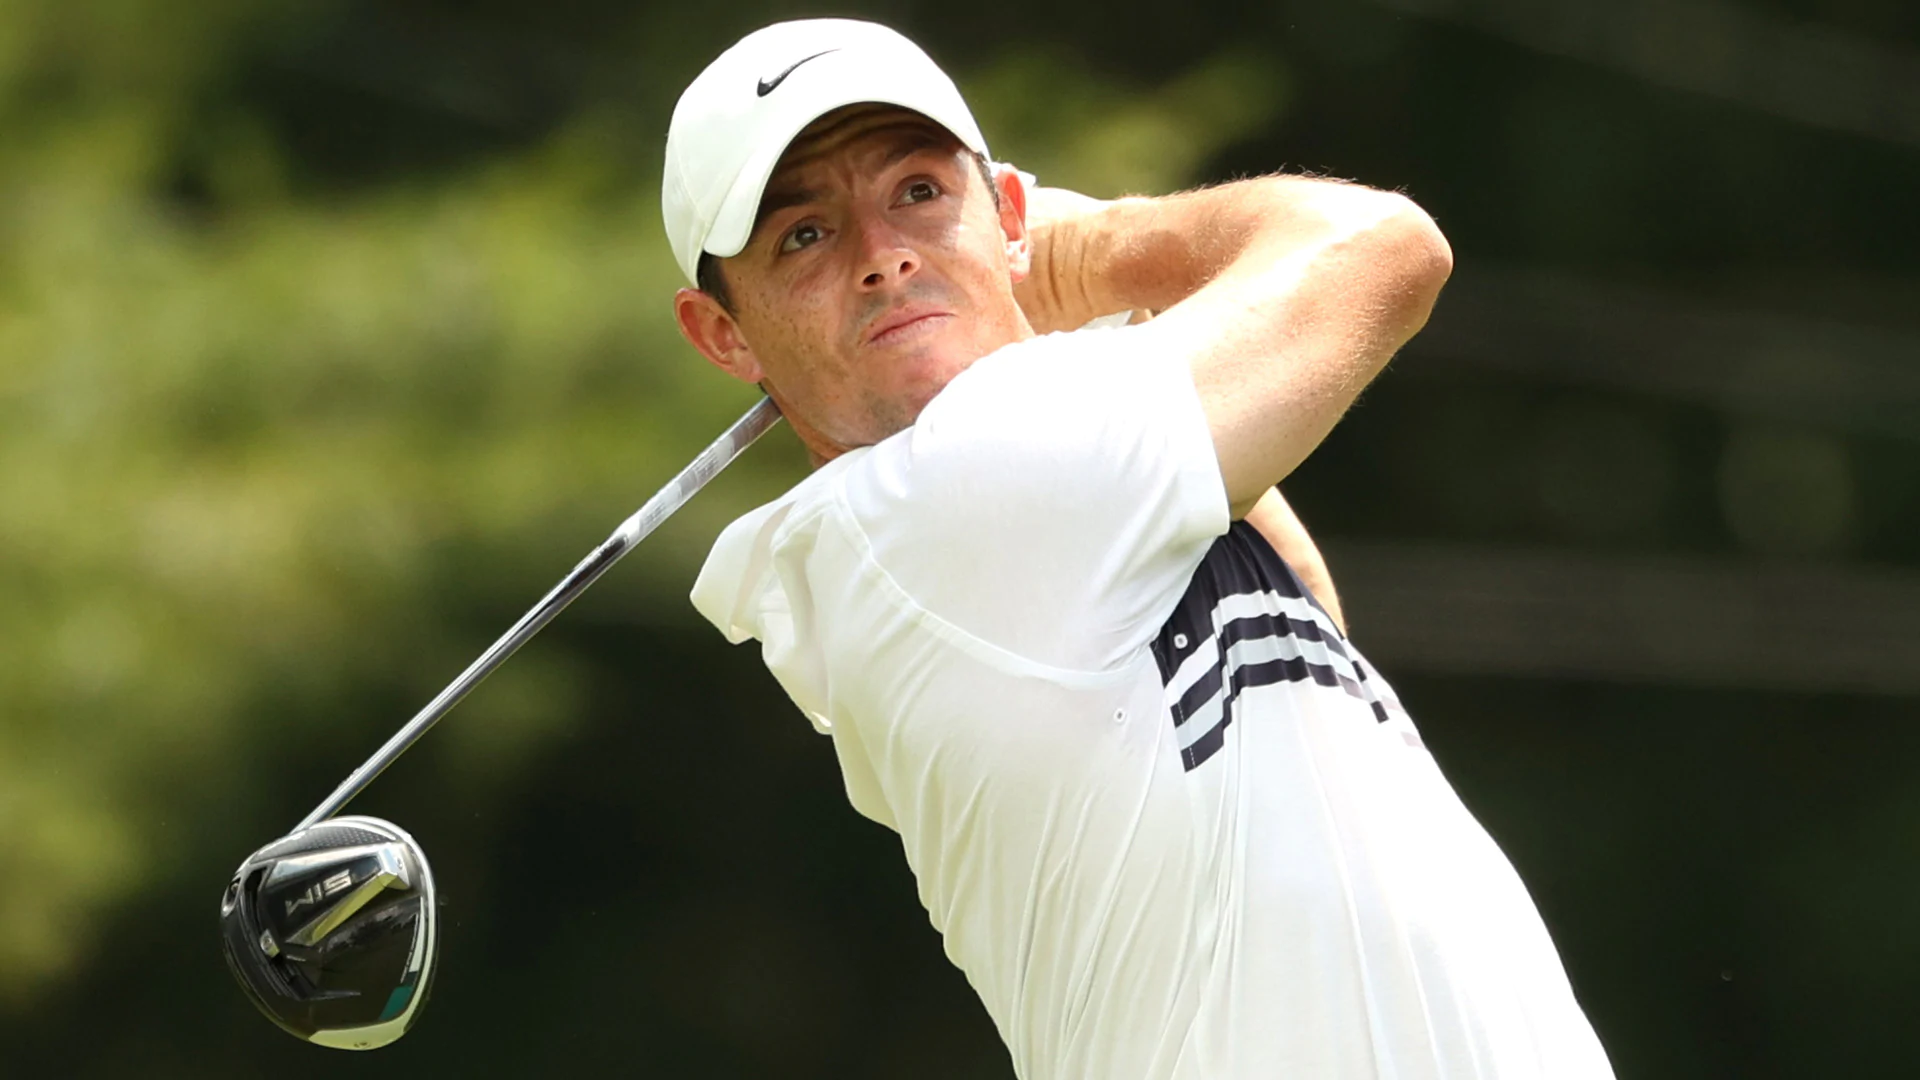 Rory McIlroy comfortable playing PGA in San Francisco, if everyone acts properly